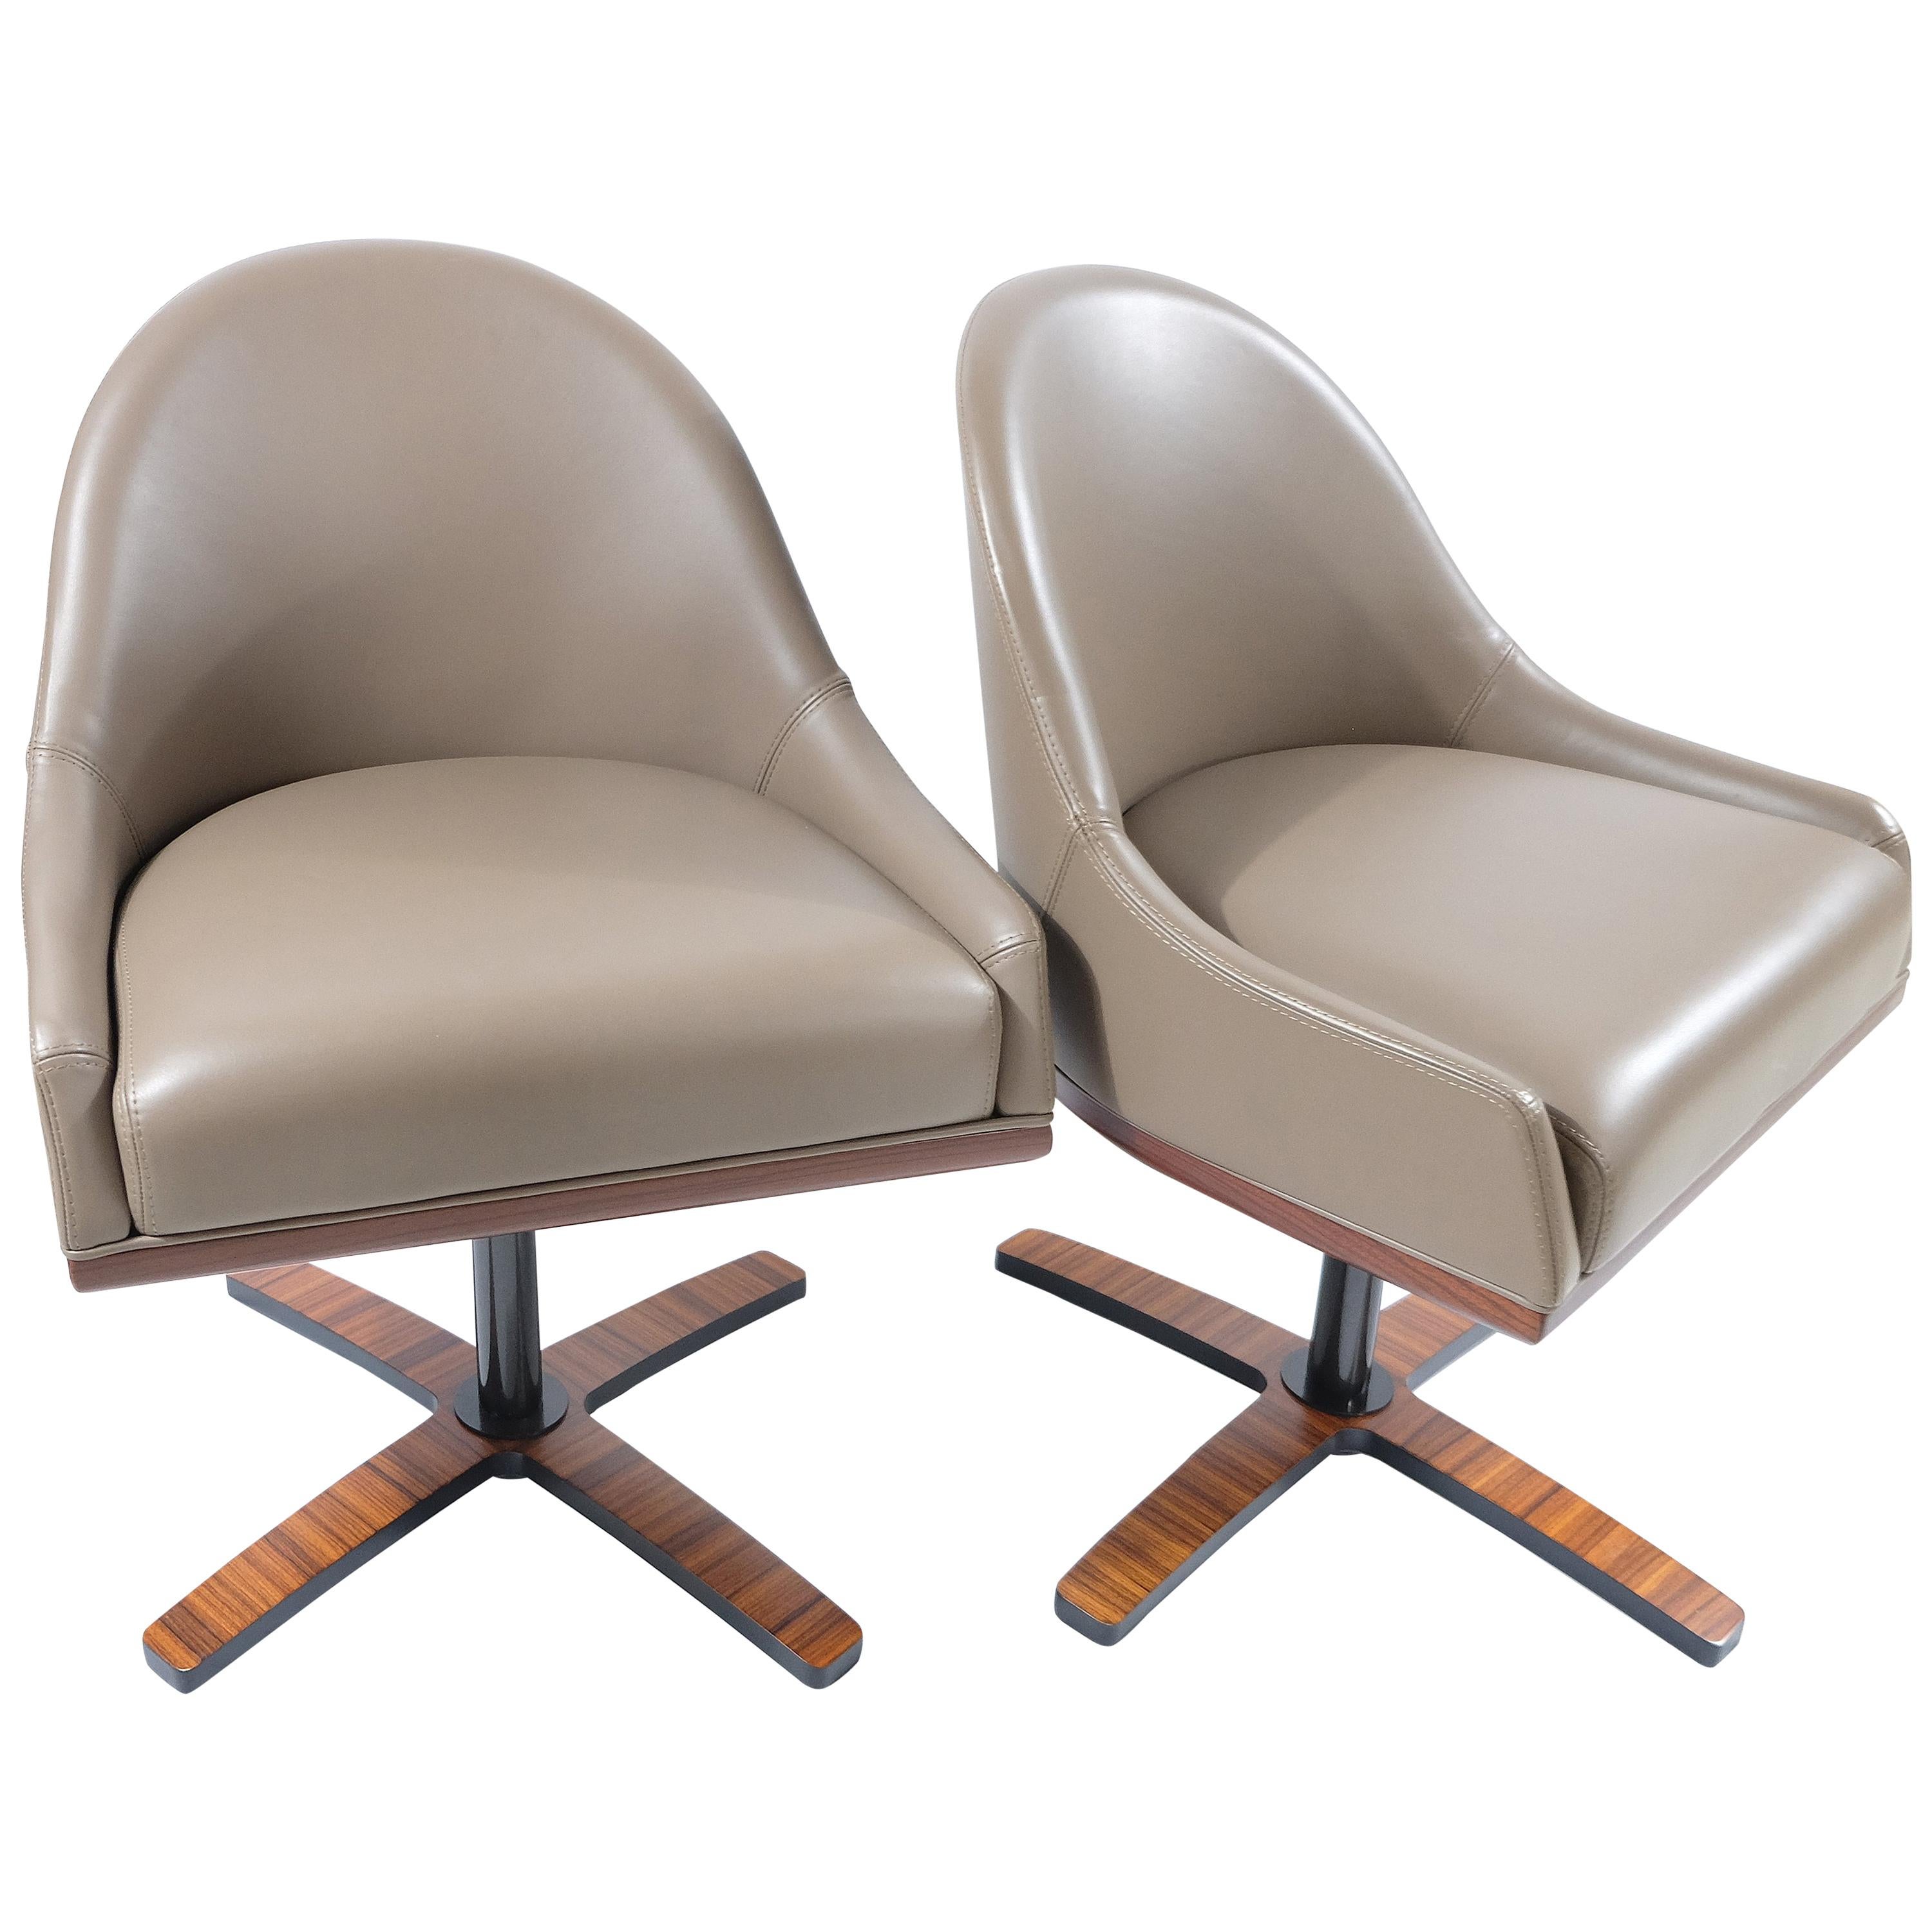 Umberto Asnago Medea Mobilidea "Chic" Swivel Chairs, Pair